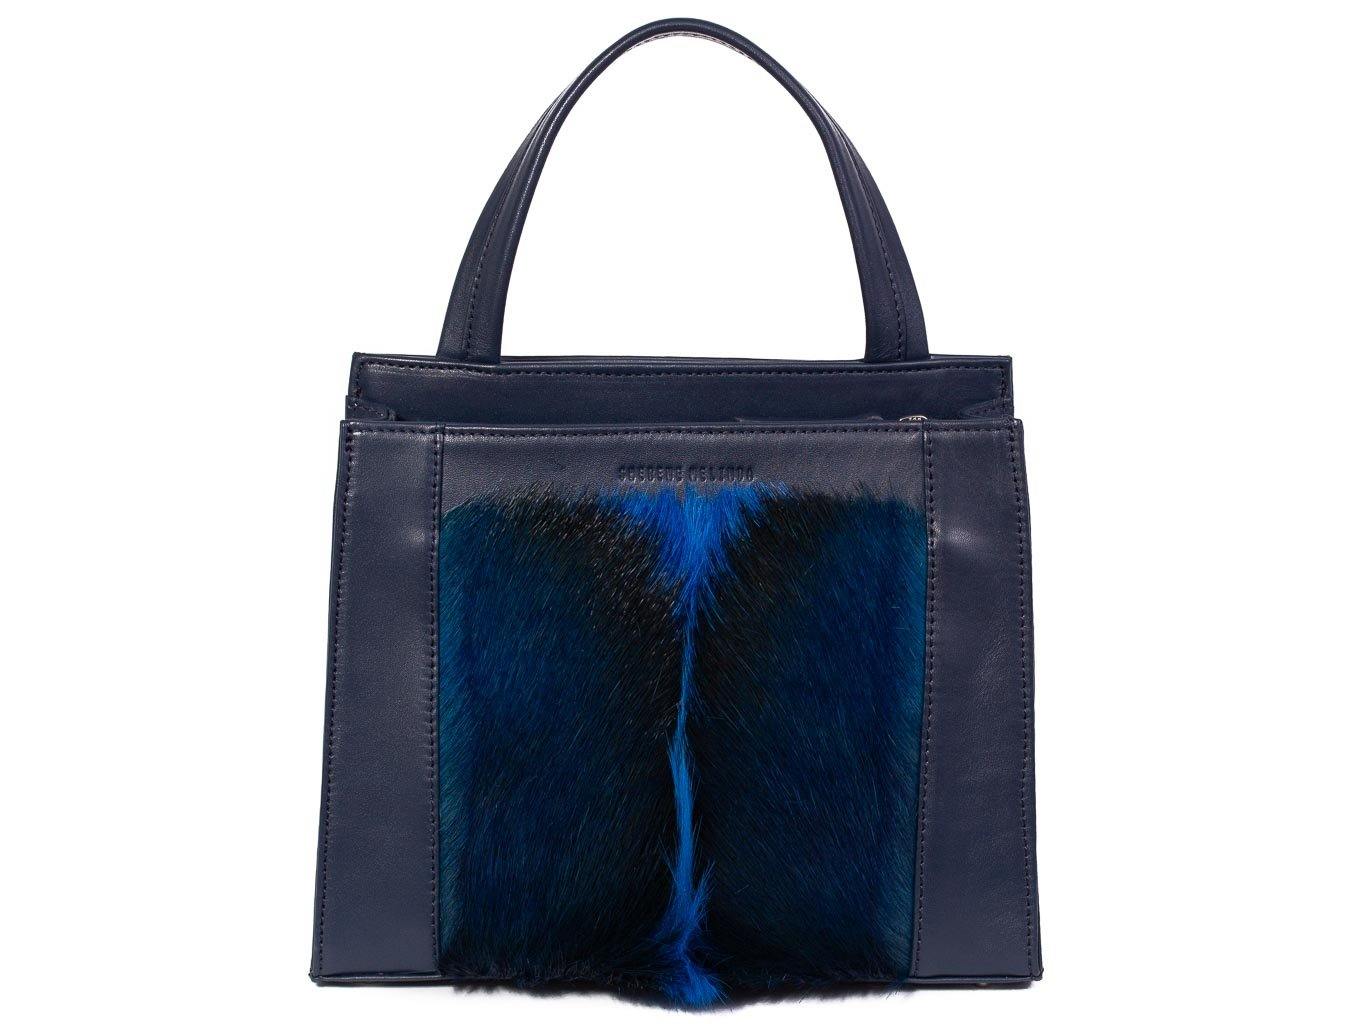 Top Handle Springbok Handbag in Navy Blue with a fan feature by Sherene Melinda front